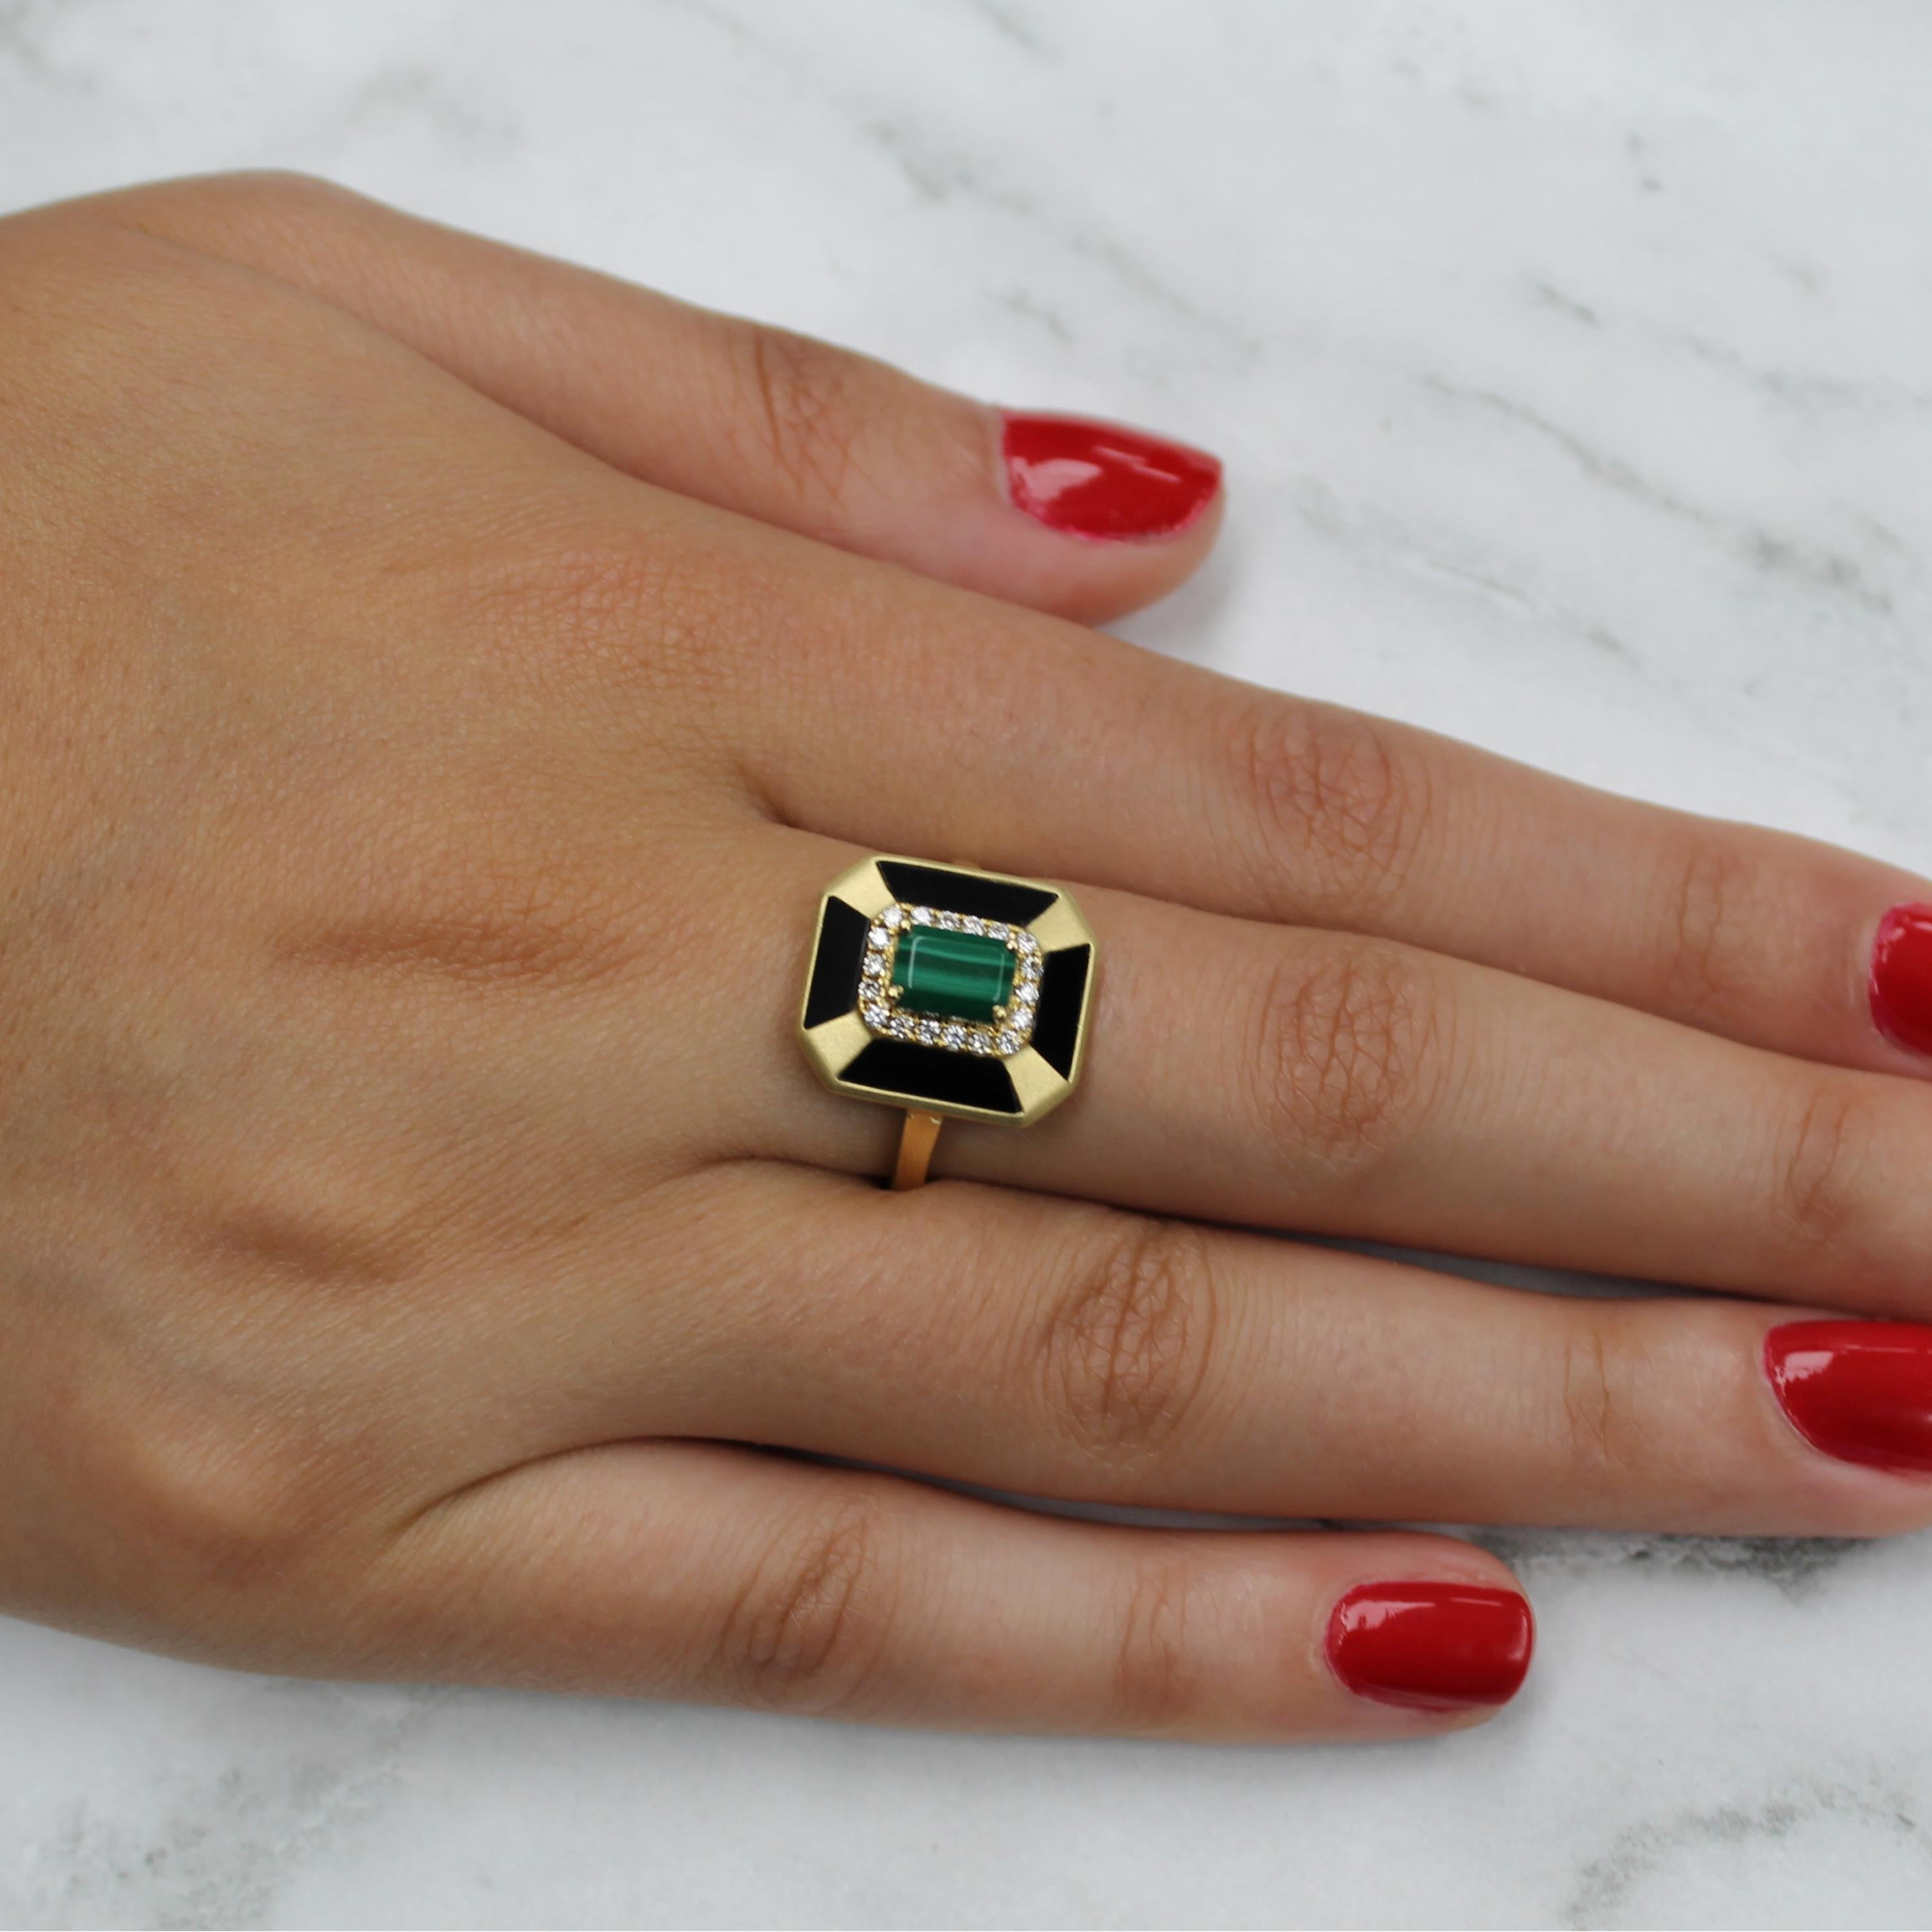 *Please allow 4-6 weeks for delivery*

Art-Deco Style Cocktail Ring featuring Emerald-Cut Malachite, Black Onyx Inlay, and diamonds set in 18K yellow gold. Finger size 6.5, adjustable upon request/quote. The Gatsby collection from Doves by Doron